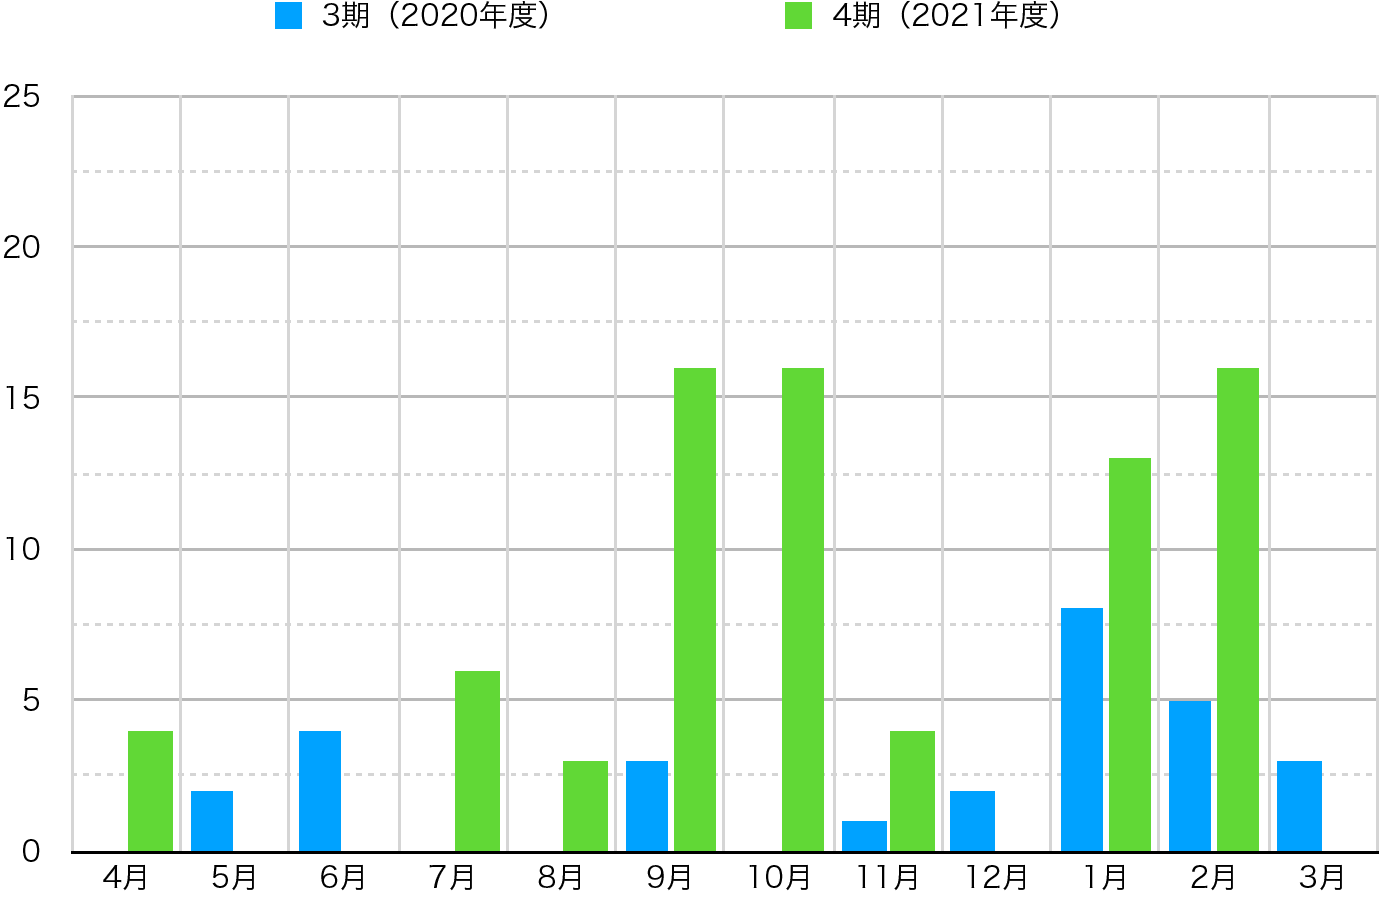 Figure 4: Monthly pull requests for the Vivliostyle.js repository compared to the previous fiscal year